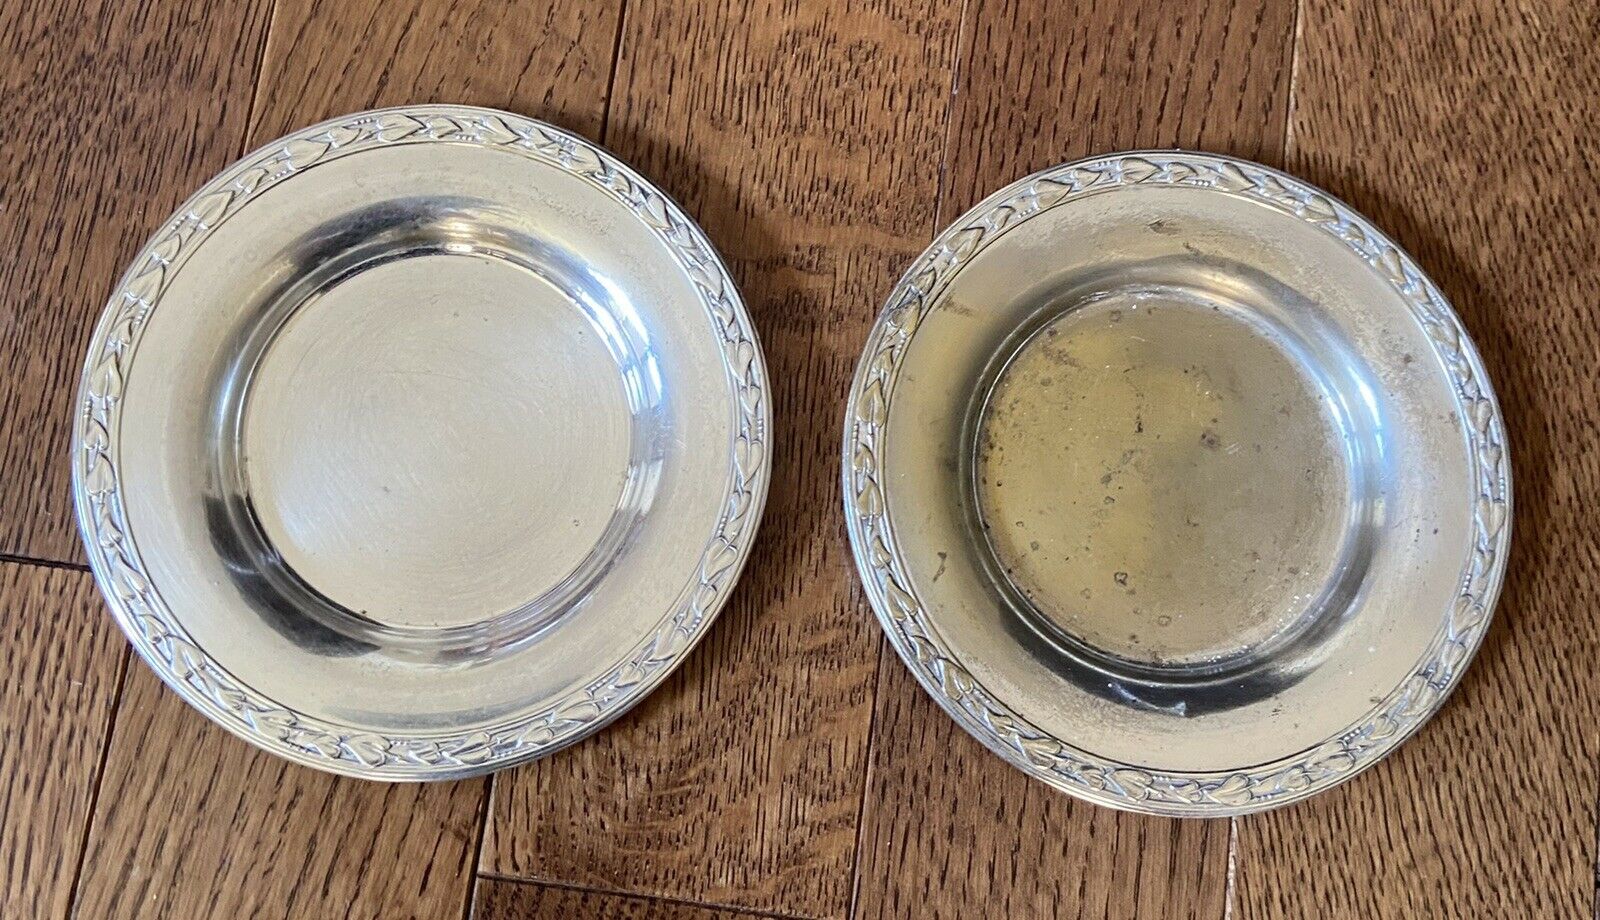 1936-wm A Rogers Silverplate Meadowbrook Plates 3.75 In Diameter- Set Of 2